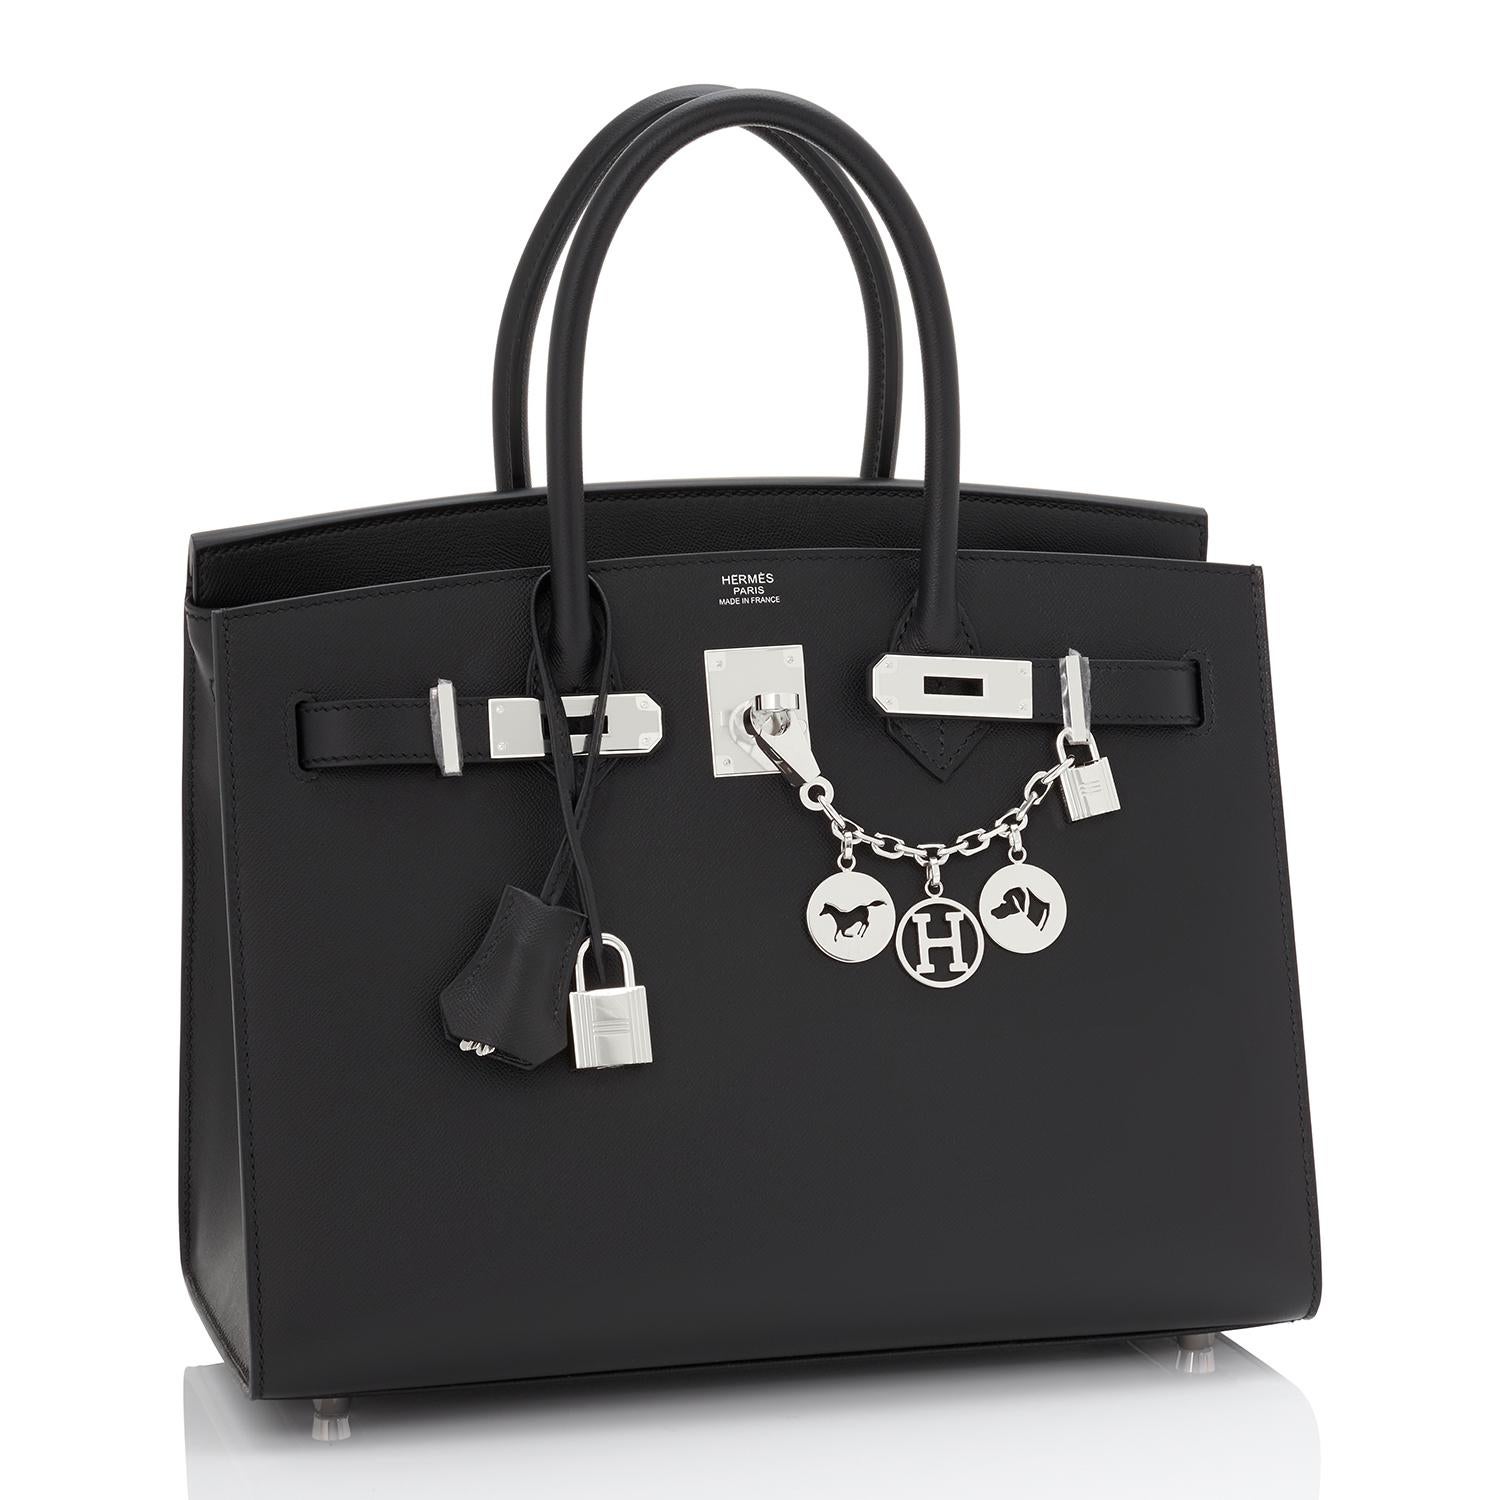 Hermes Birkin 30 Sellier Black Veau Madame Palladium Hardware Y Stamp, 2020 RARE
Brand New in Box. Store Fresh. Pristine Condition (with plastic on hardware) 
Perfect gift! Comes in full set with clochette, lock, keys, raincoat, dust bag, and Hermes